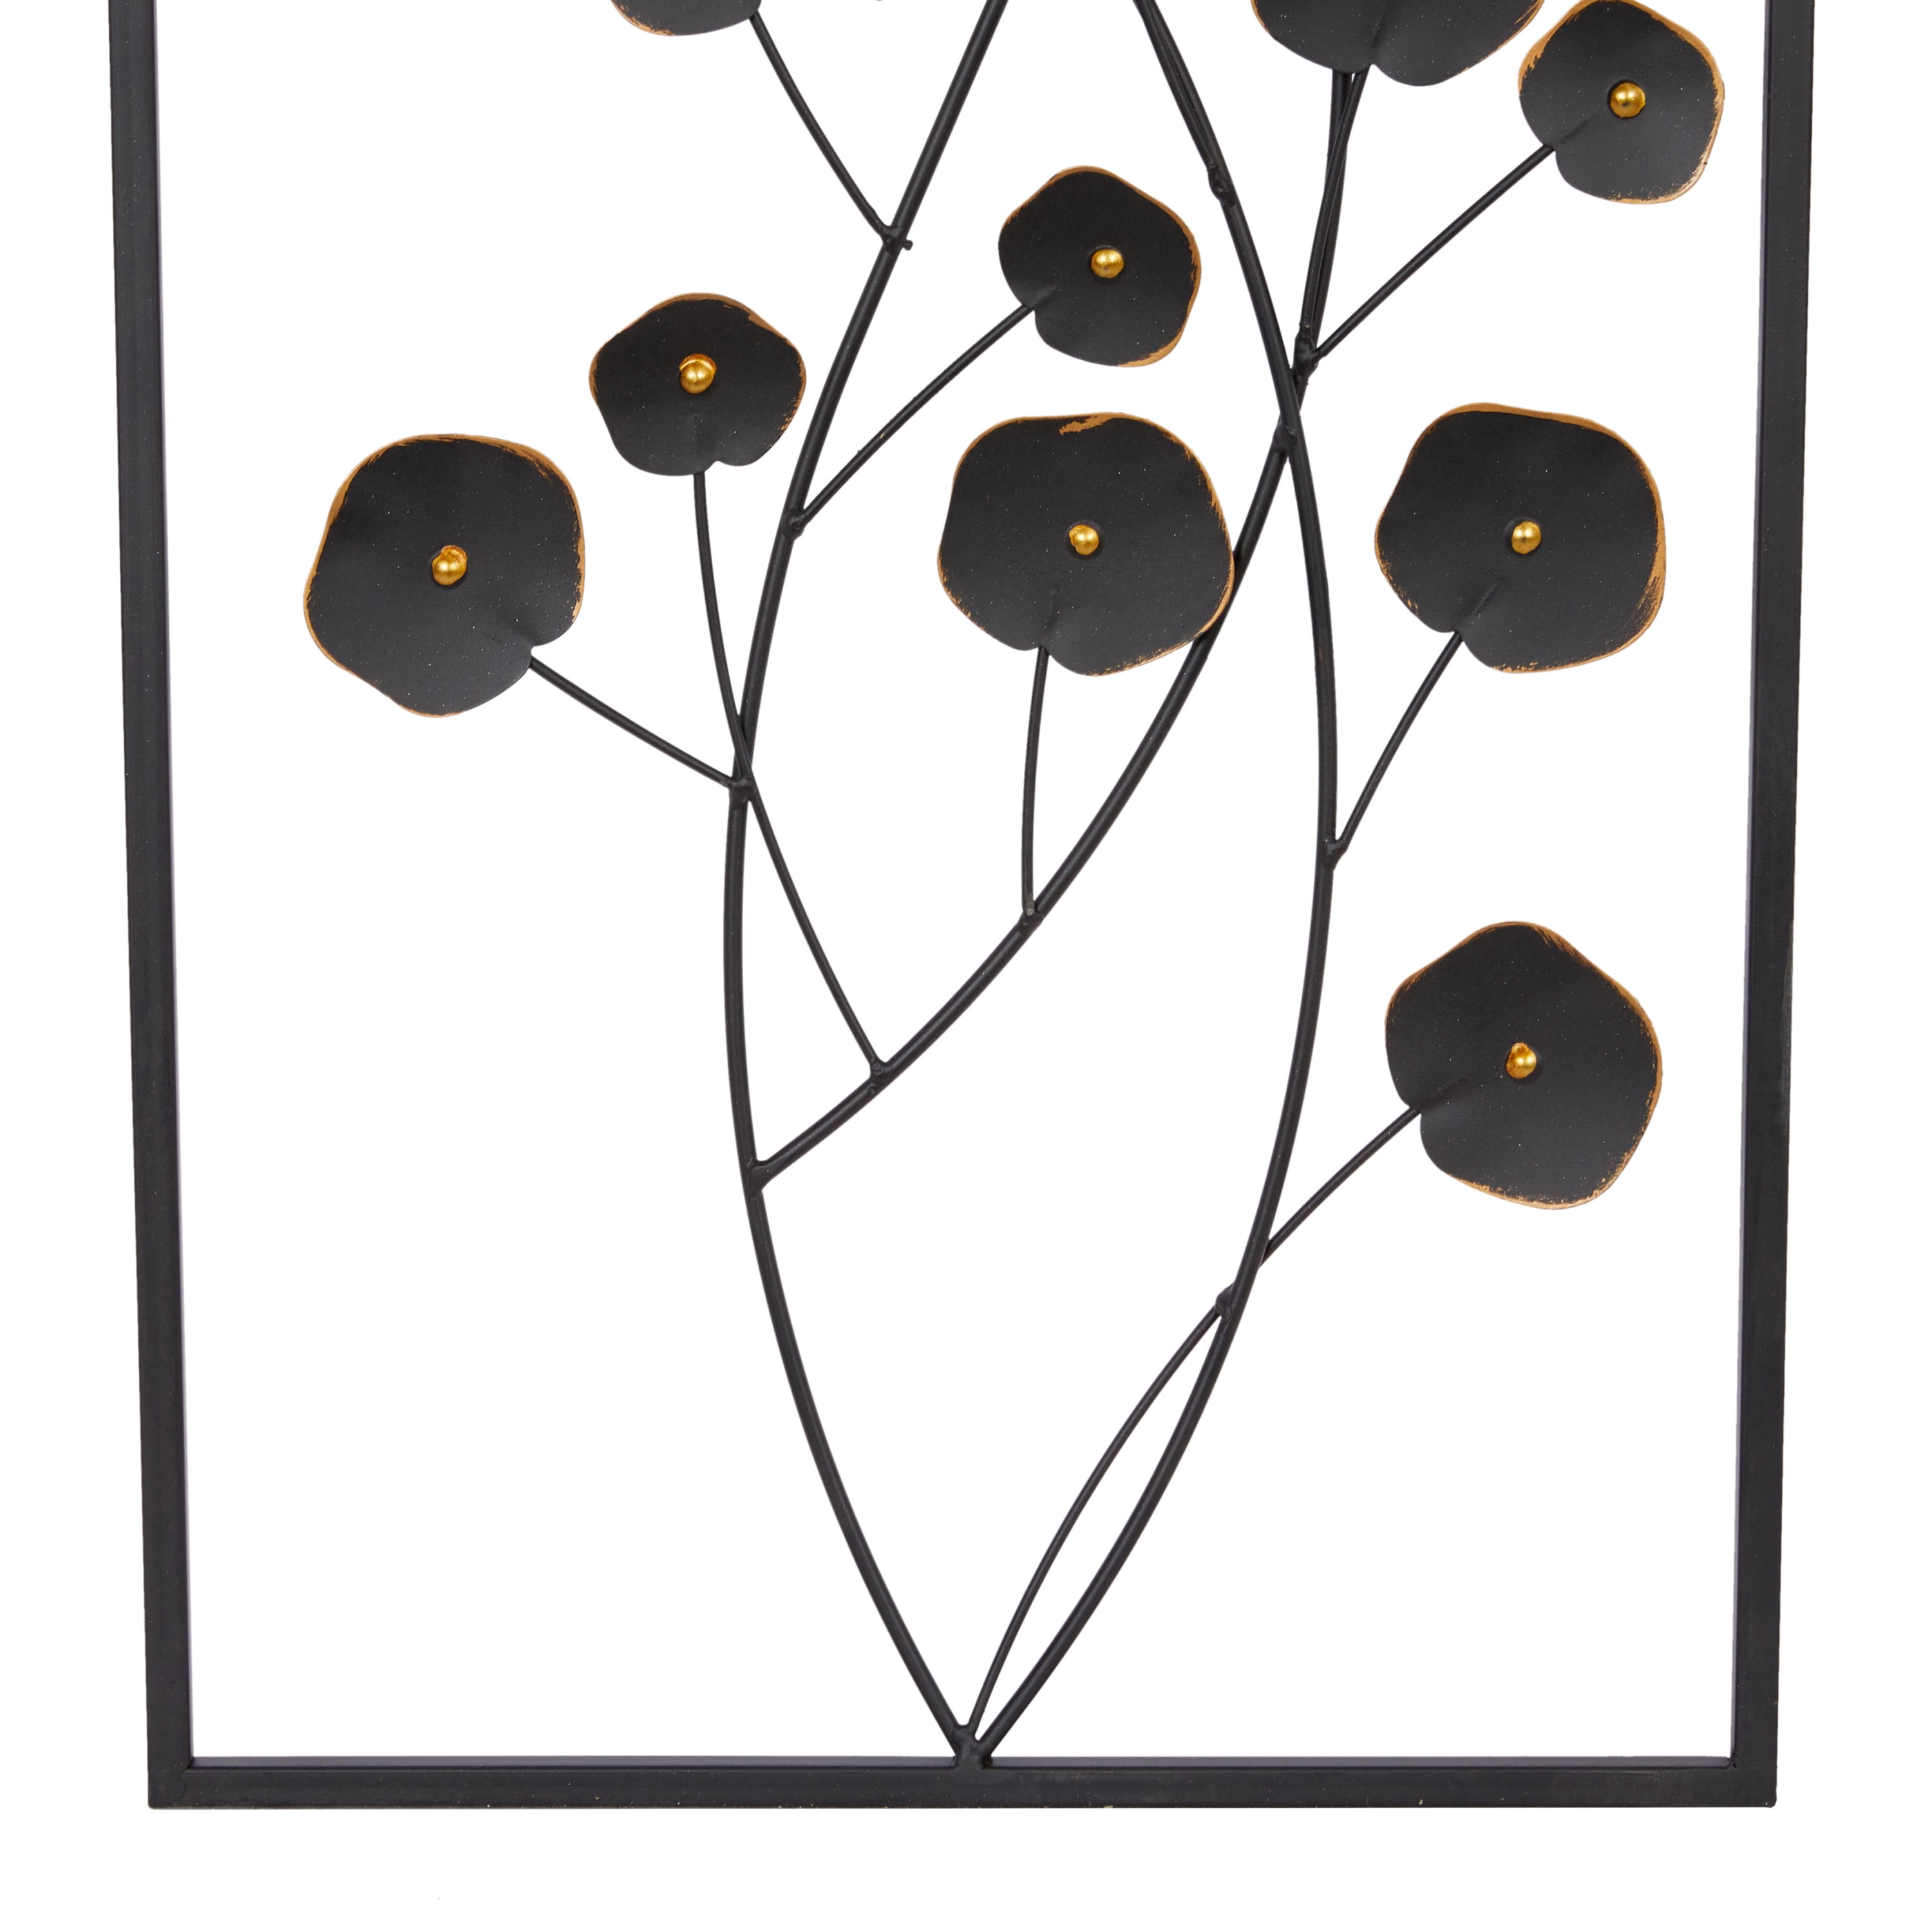 Deco 79 Metal Floral Wall Decor with Black Frame, Set of 2 12W, 36H, –  Medi Thread Collection